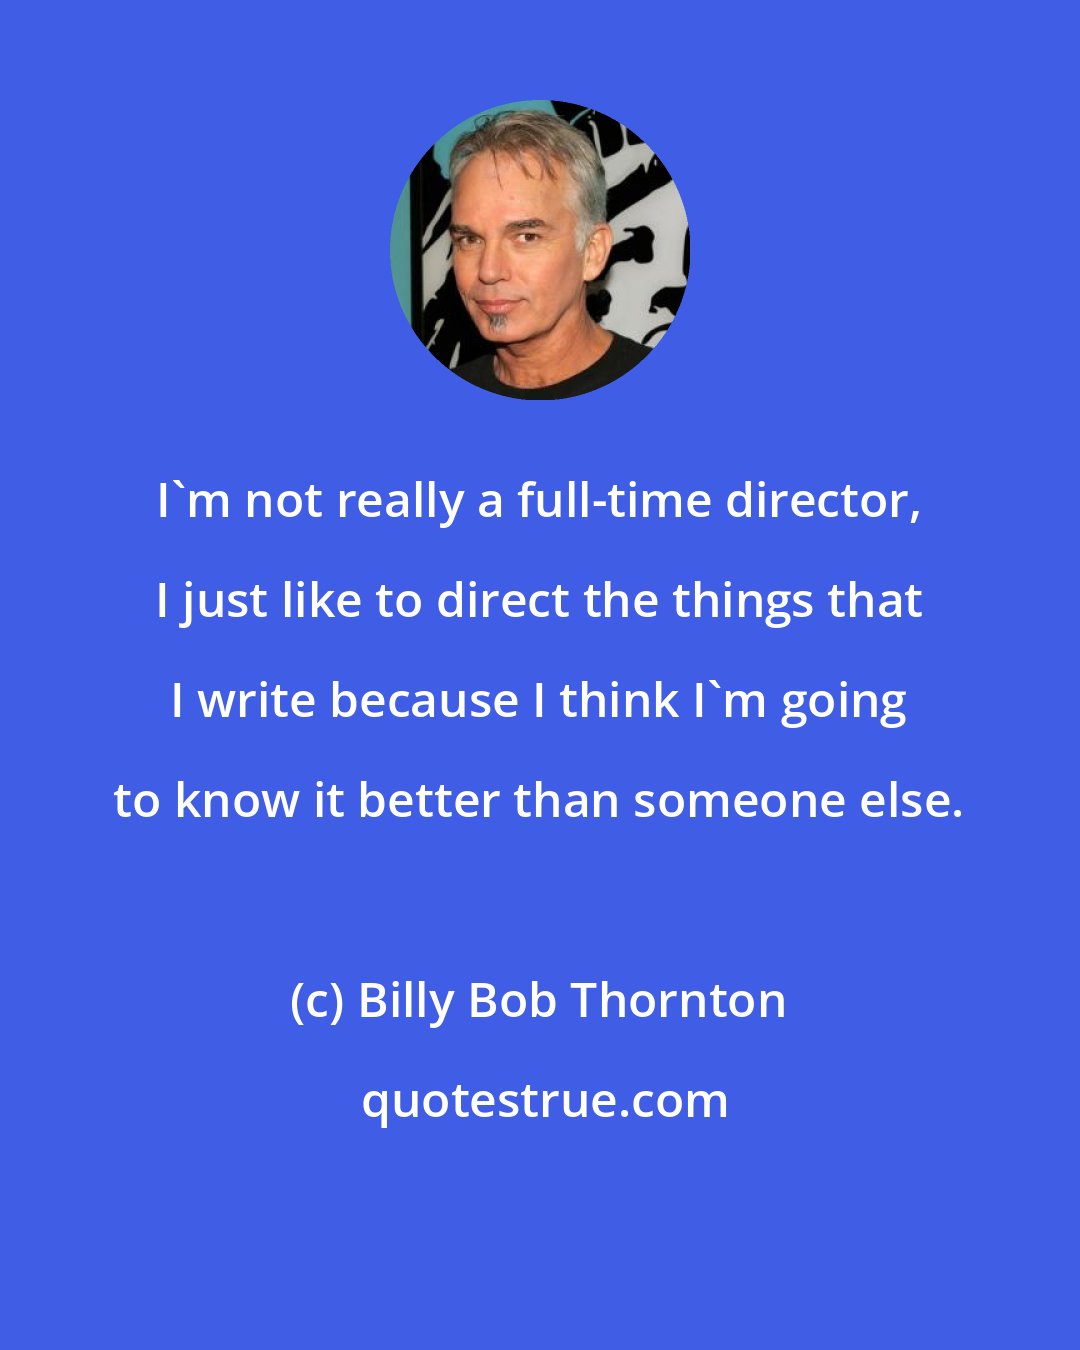 Billy Bob Thornton: I'm not really a full-time director, I just like to direct the things that I write because I think I'm going to know it better than someone else.